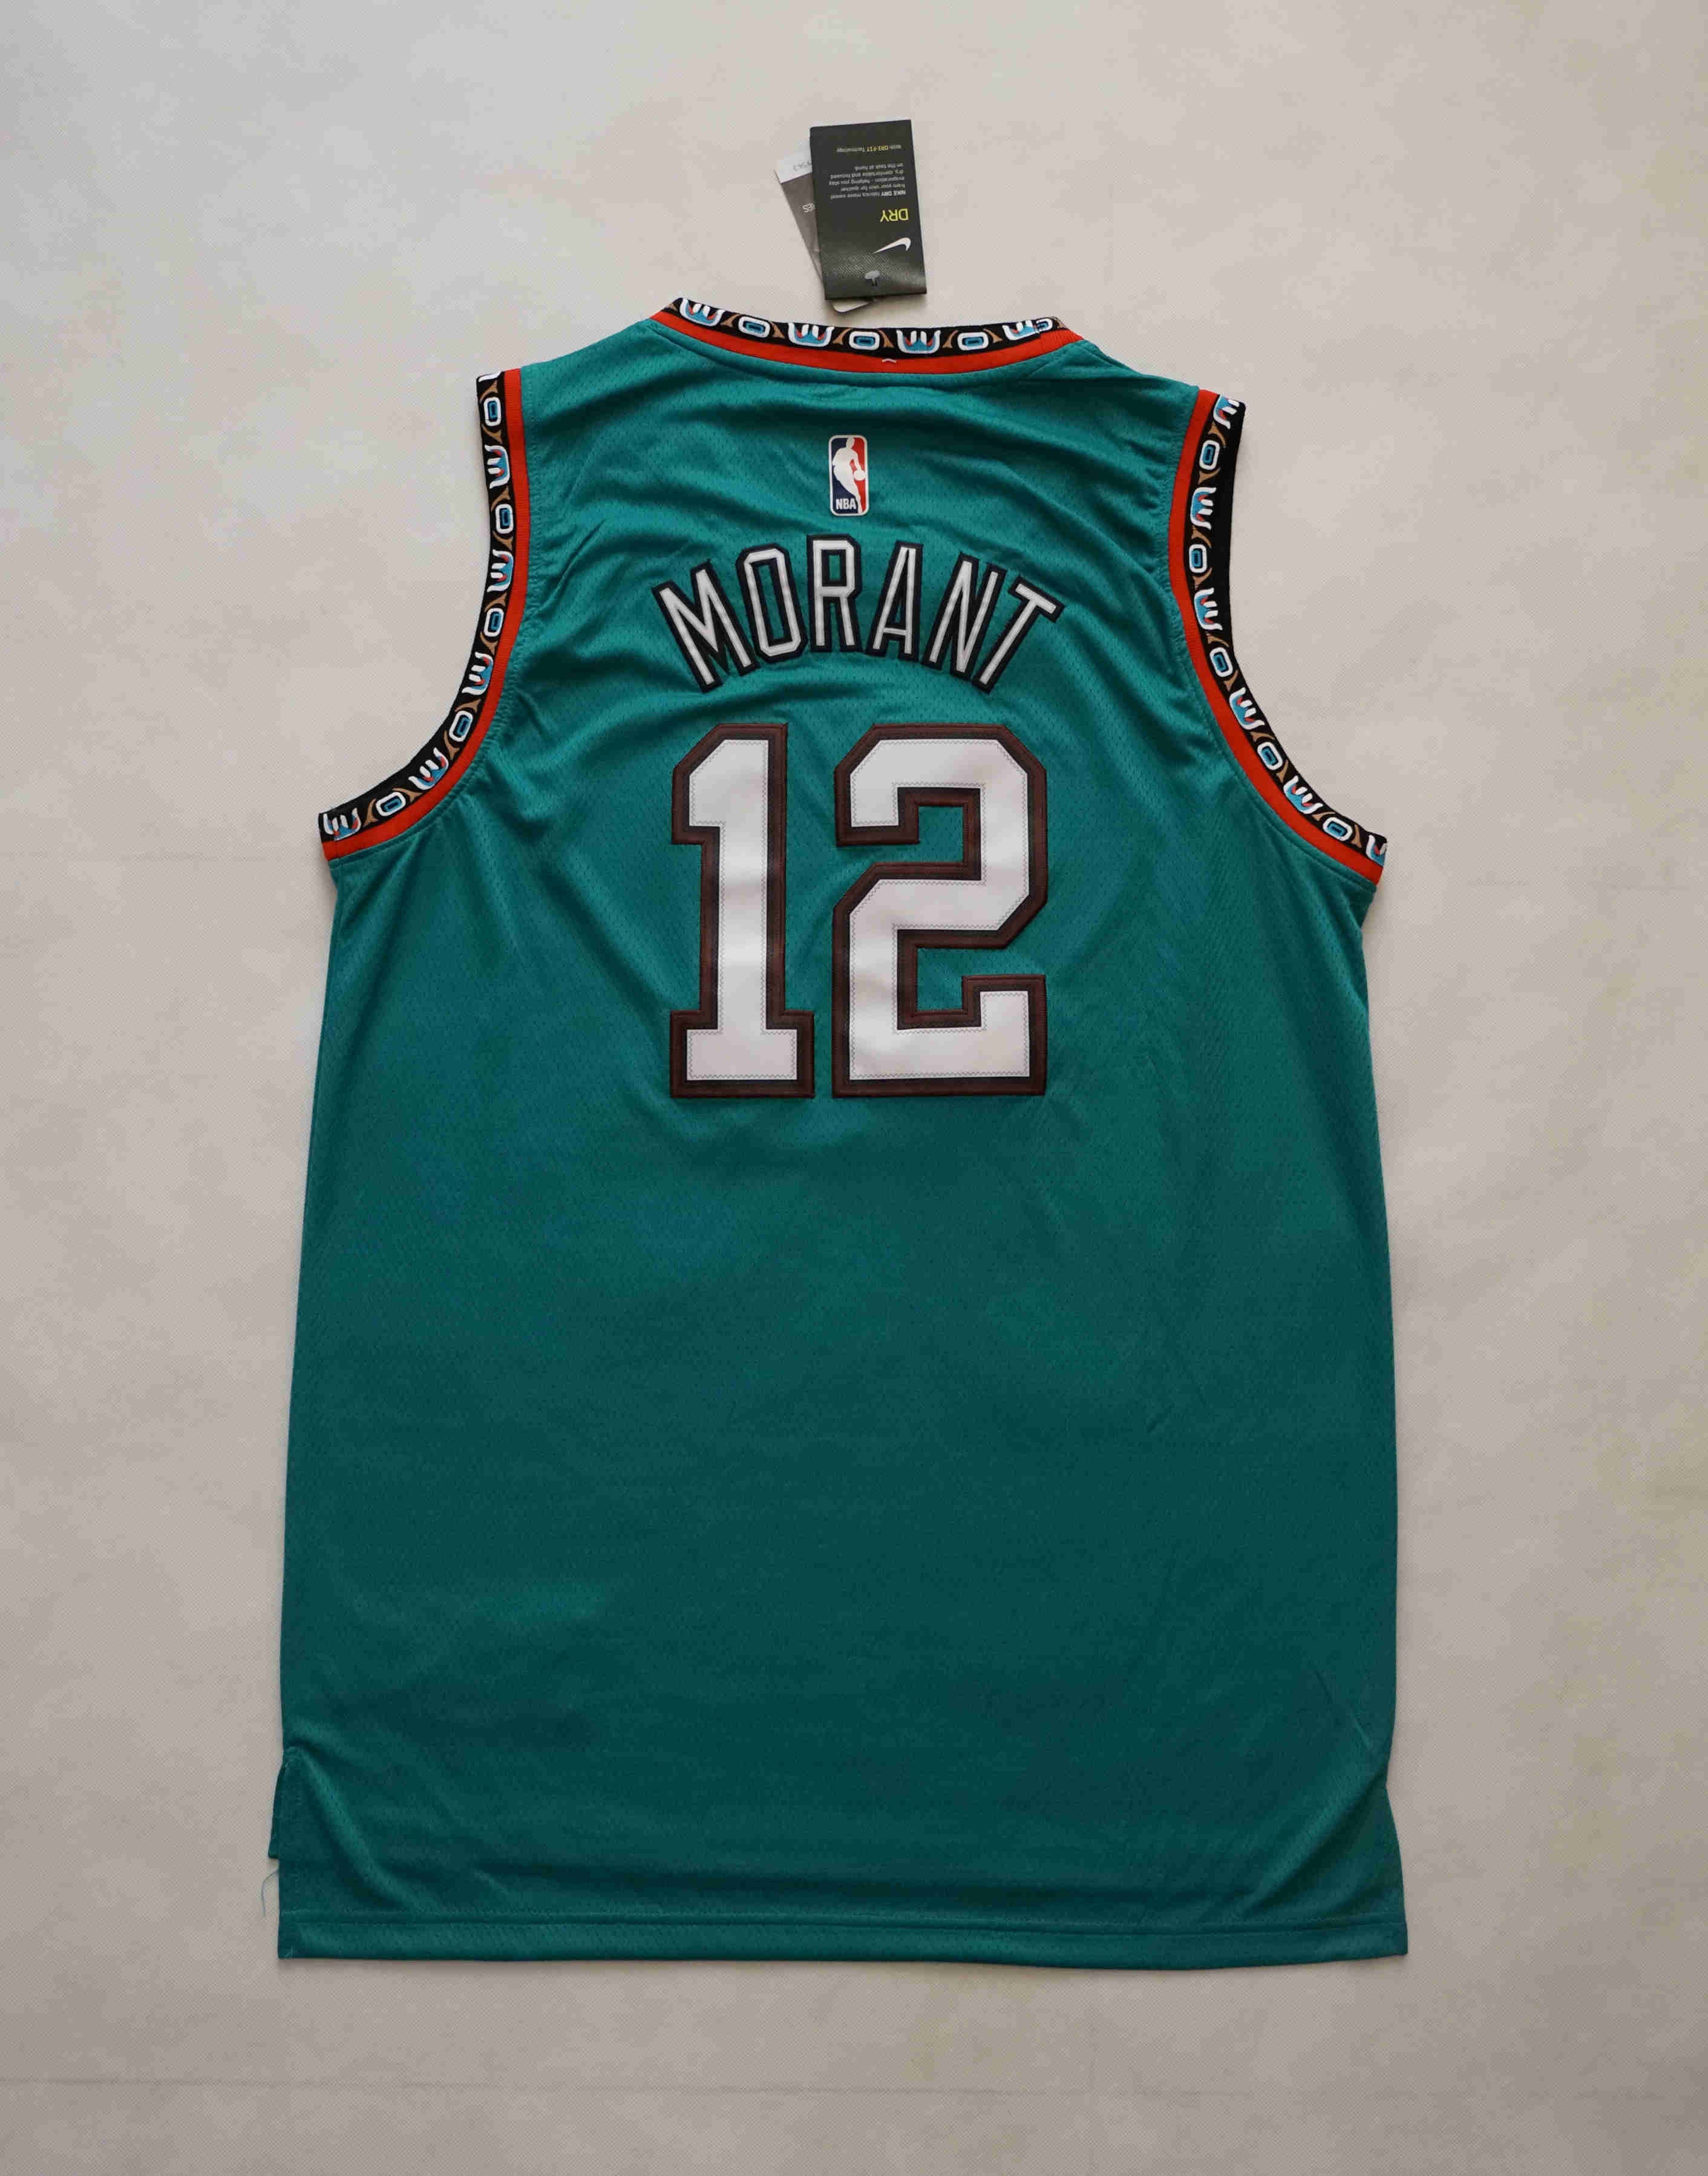 vancouver grizzlies home jersey